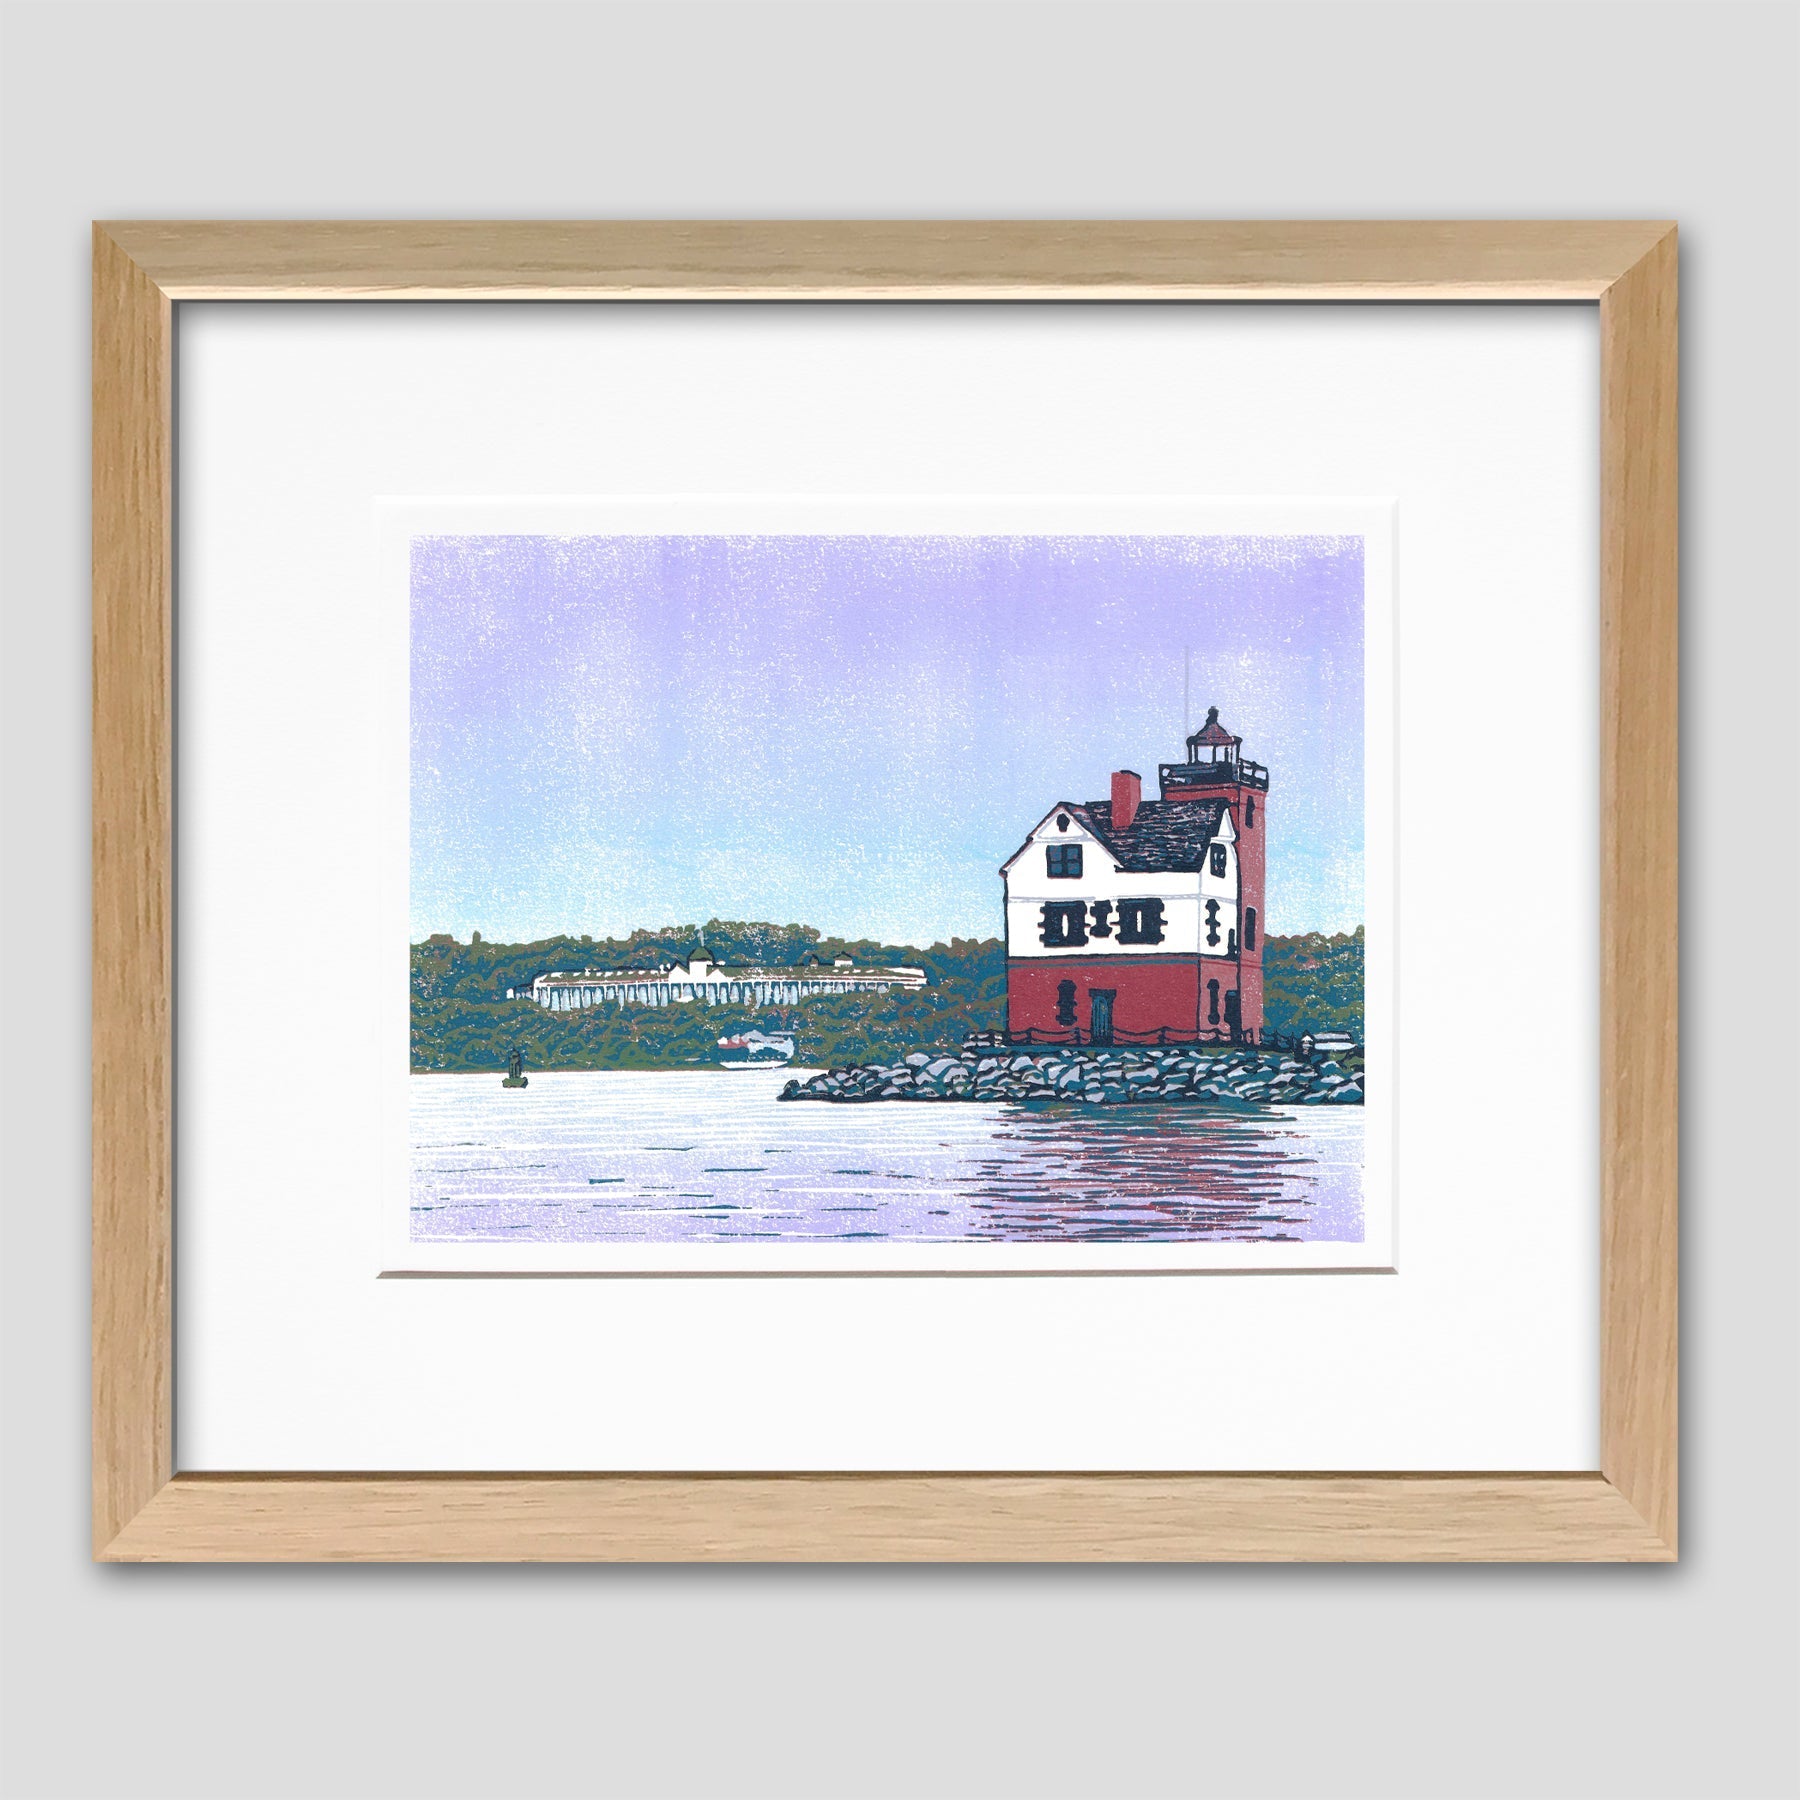 Framed lighthouse art created by Natalia Wohletz of Peninsula Prints, Mackinac Island.  Rounding the Island is an 8-color reduction block print featuring a unique view of Round Island Lighthouse with Grand Hotel in the background.